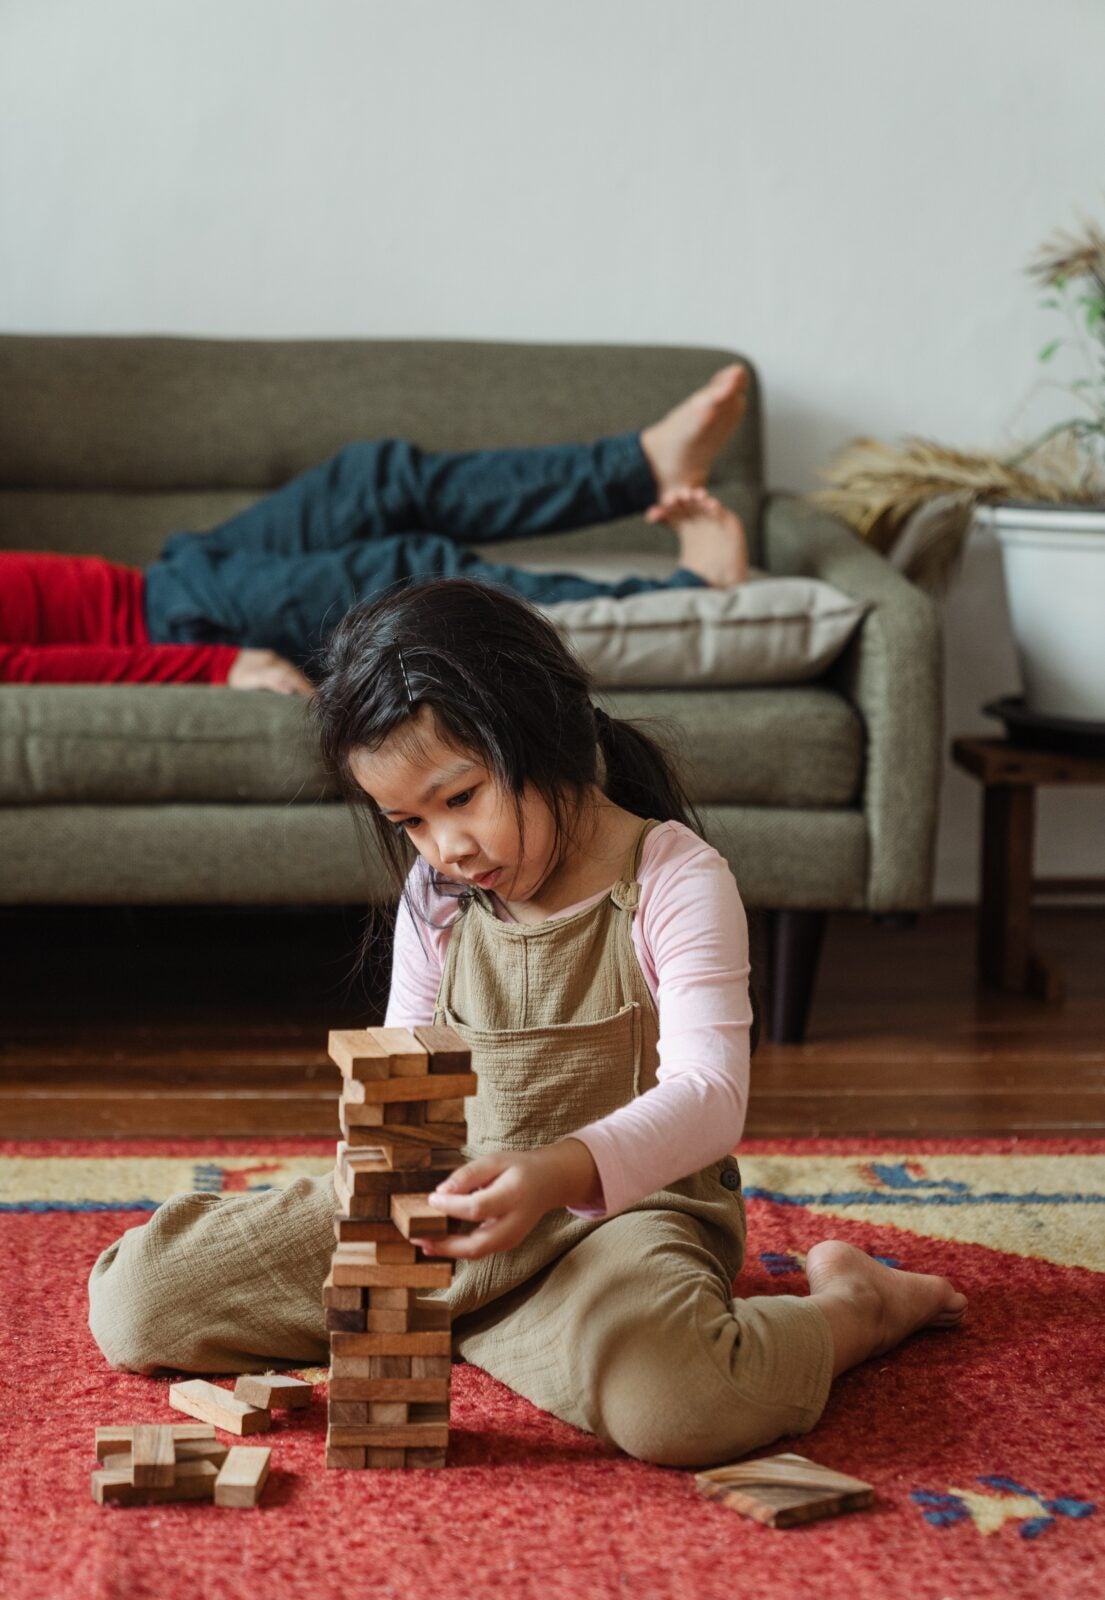 A young Asian girl playing with small wooden blocks that are stacked like Jenga while an adult rests behind her on a sofa.